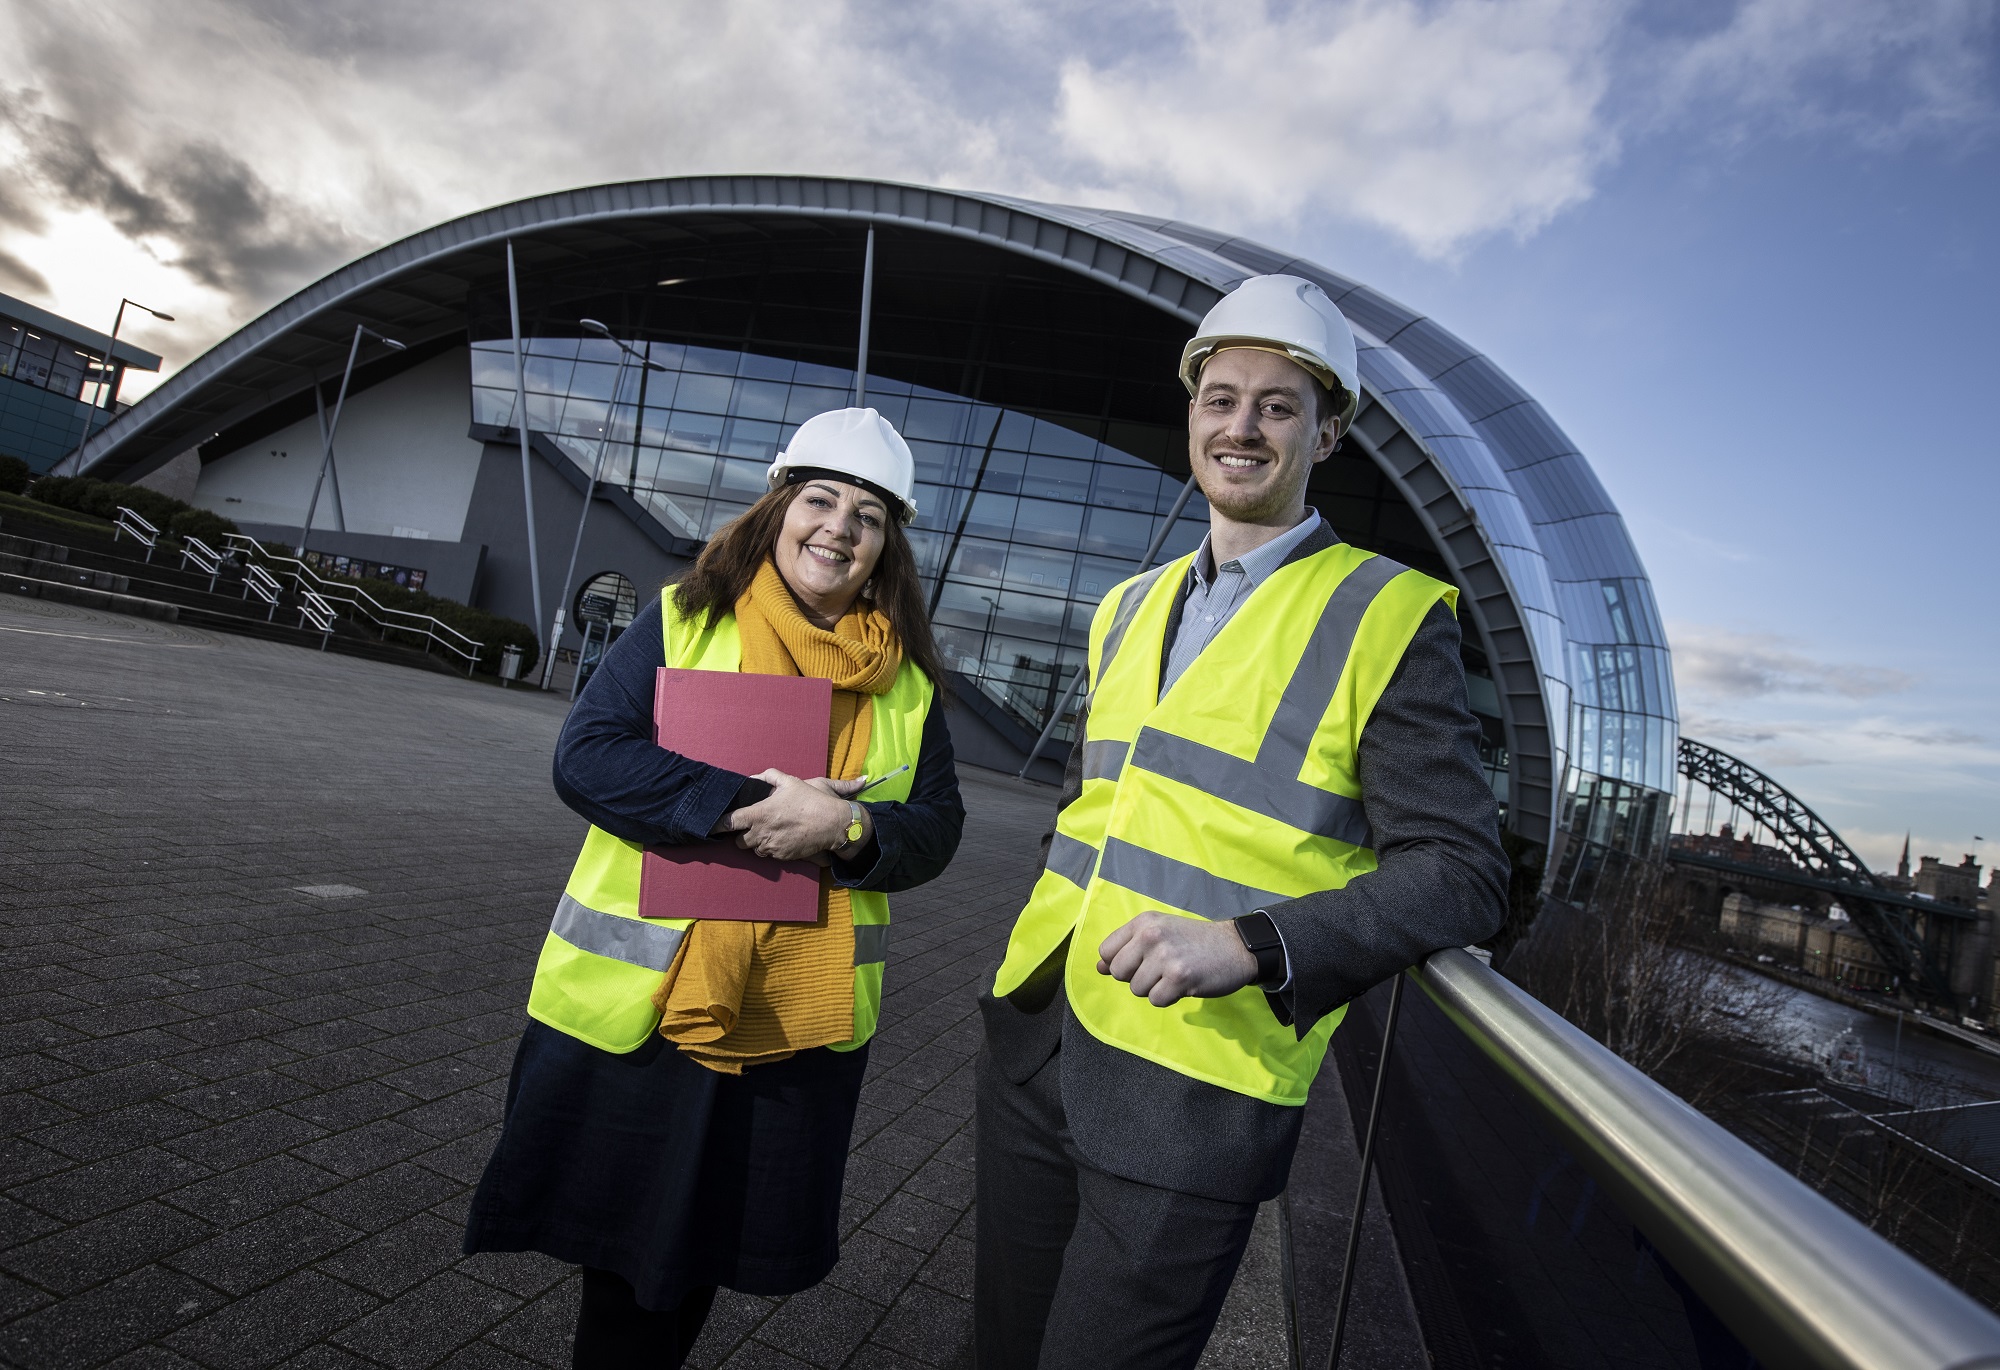 North East fit-out firm wins major venue contract